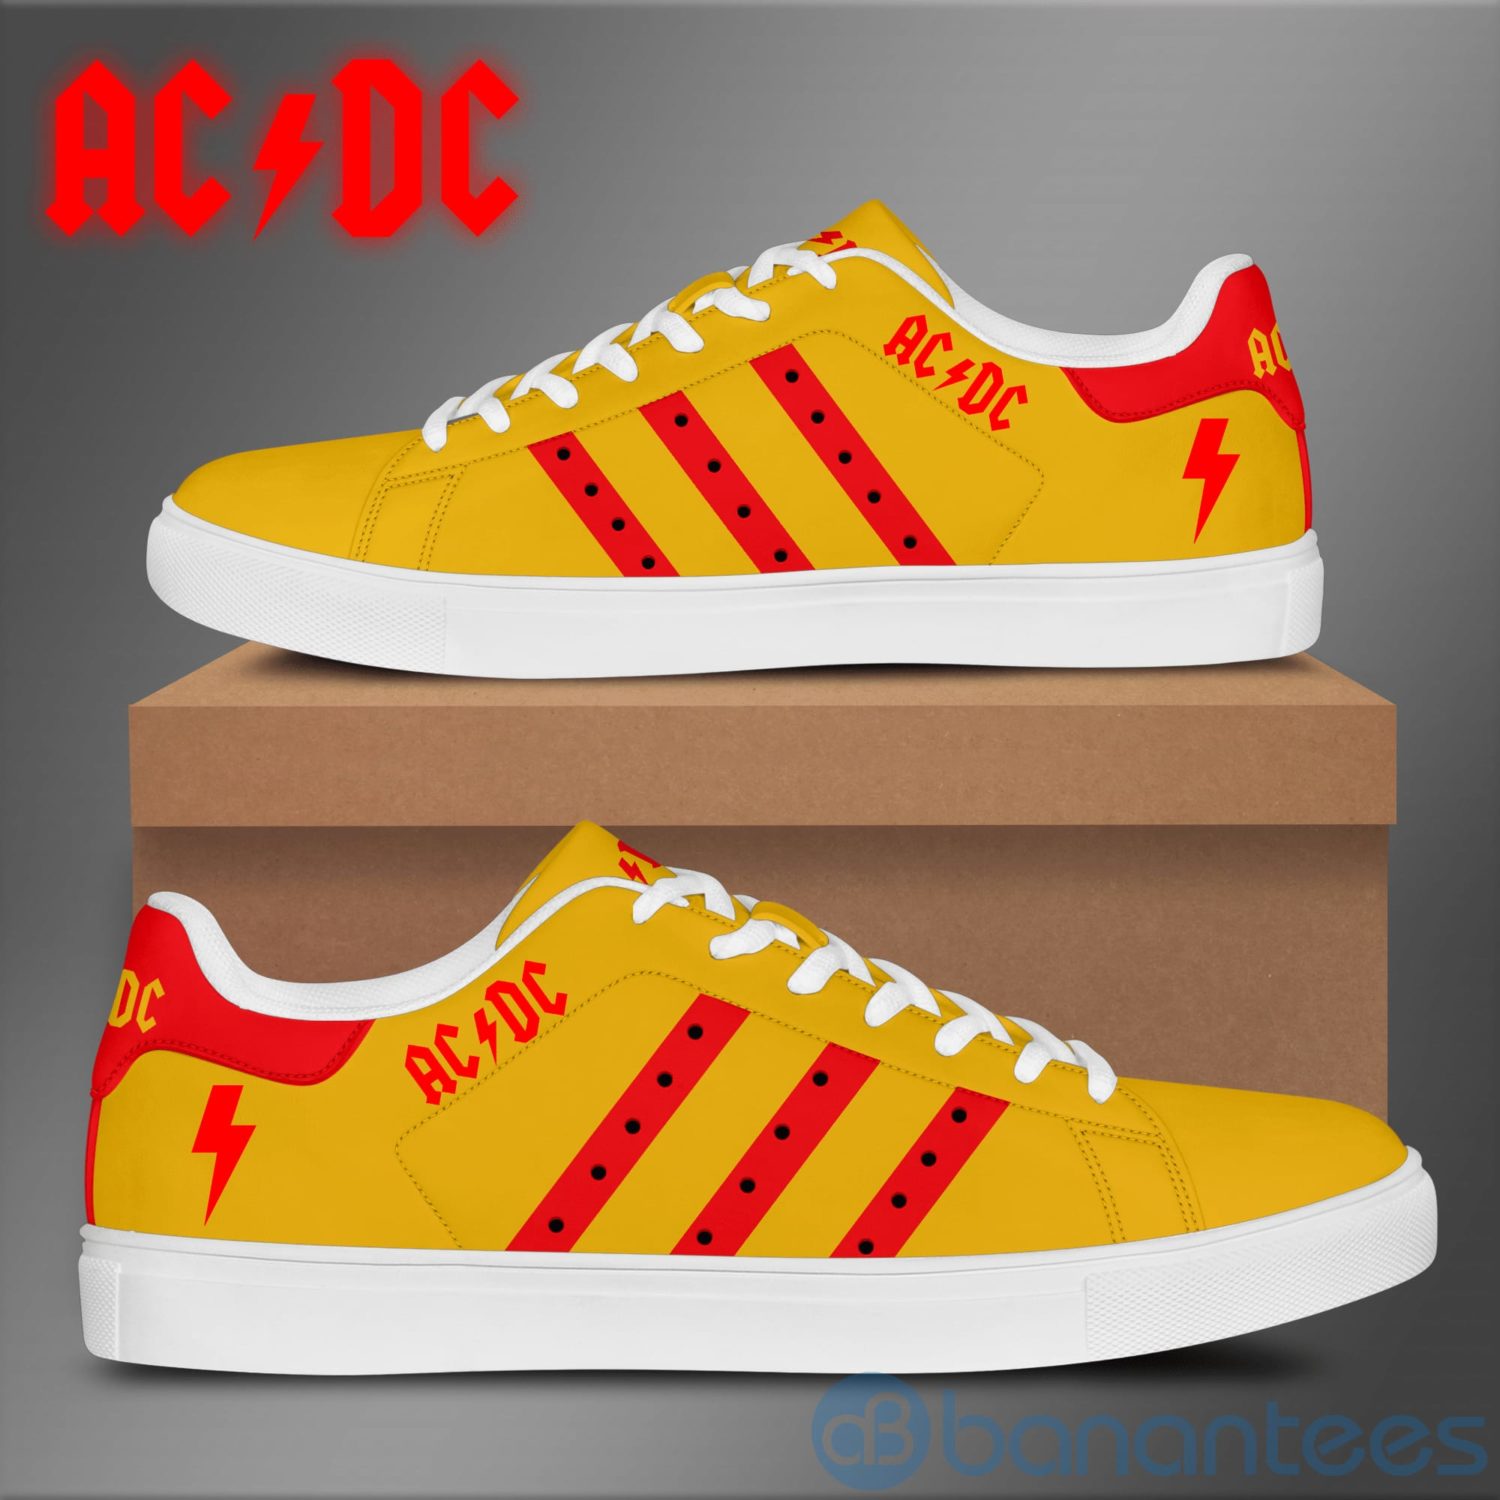 Acdc Red Striped Low Top Skate Shoes